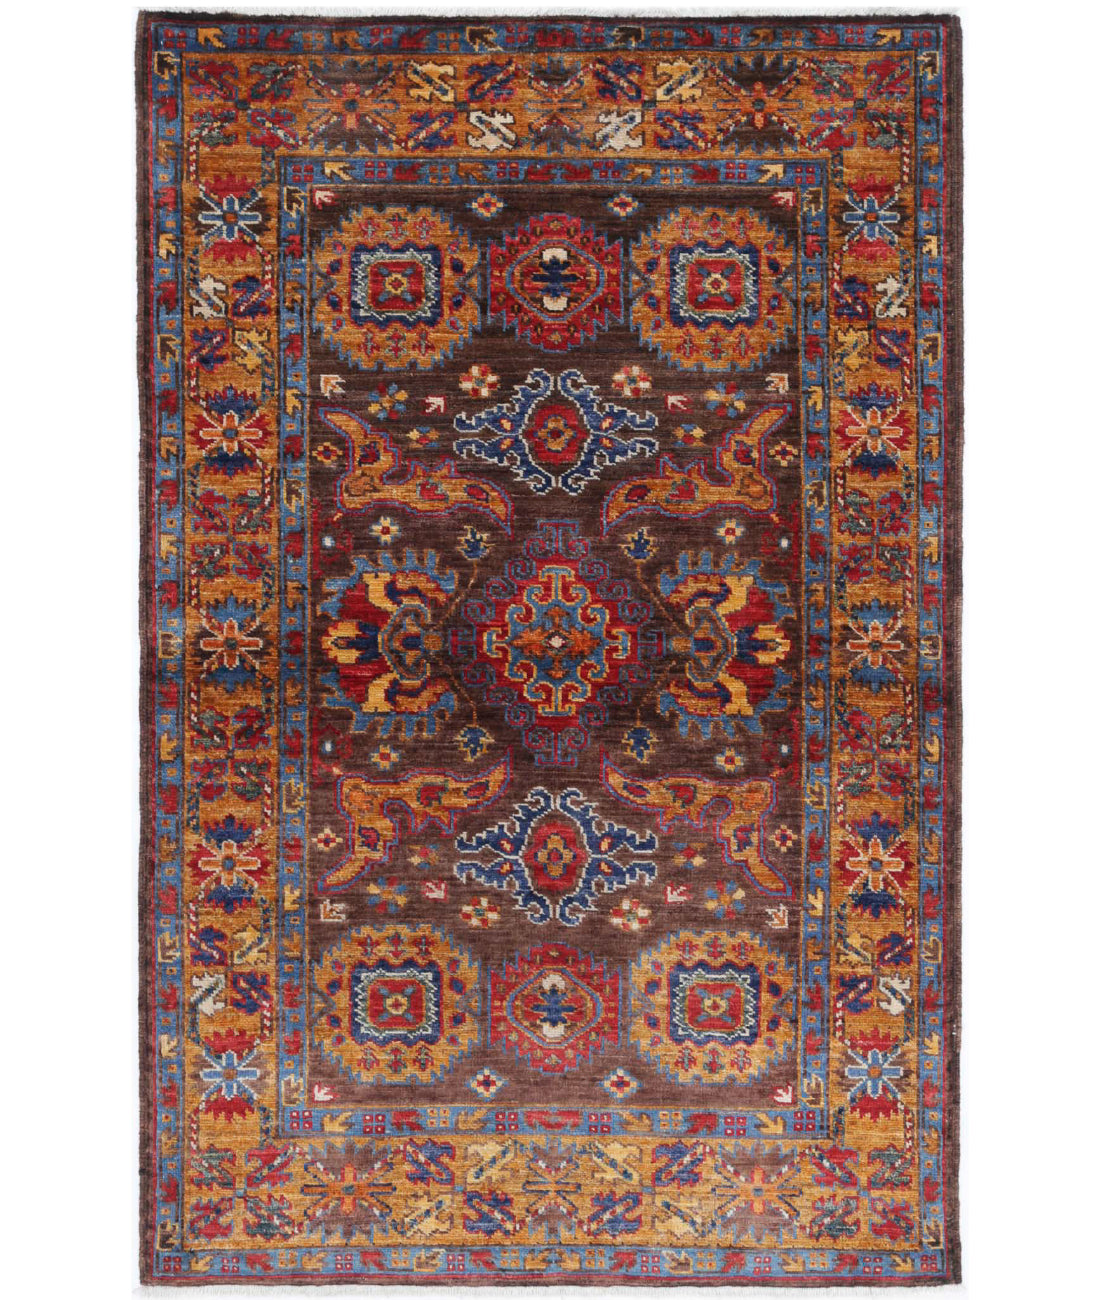 Hand Knotted Nomadic Caucasian Humna Wool Rug - 2&#39;11&#39;&#39; x 4&#39;9&#39;&#39; 2&#39;11&#39;&#39; x 4&#39;9&#39;&#39; (88 X 143) / Brown / Gold